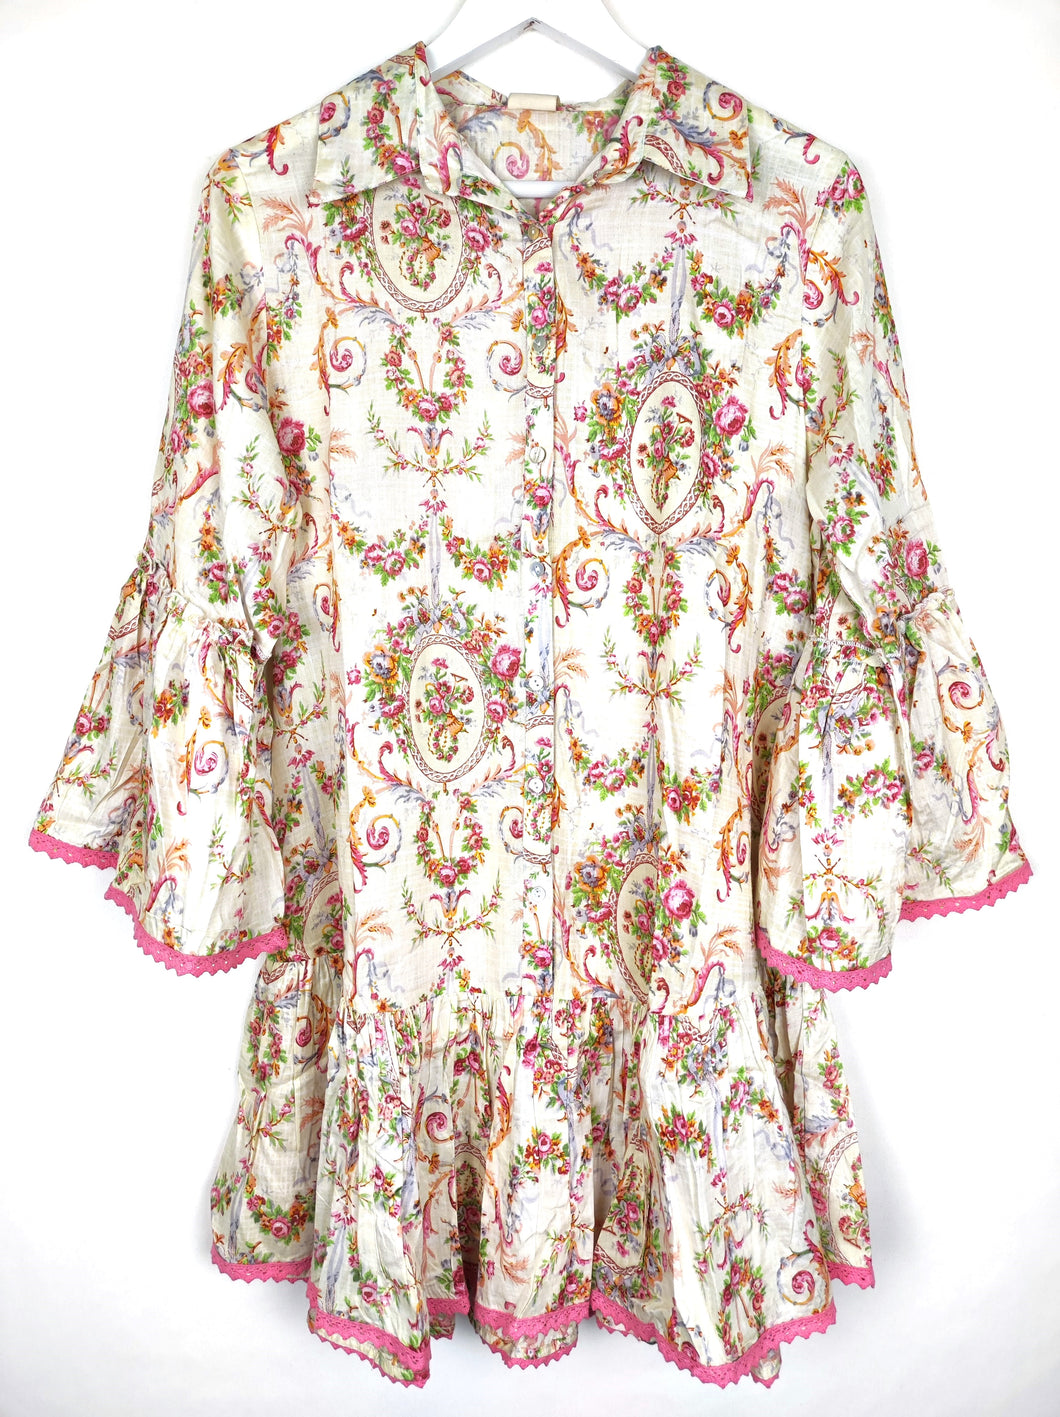 TUNIKA KLEID CREME PINK MULTICOLOR FLORAL ONE SIZE